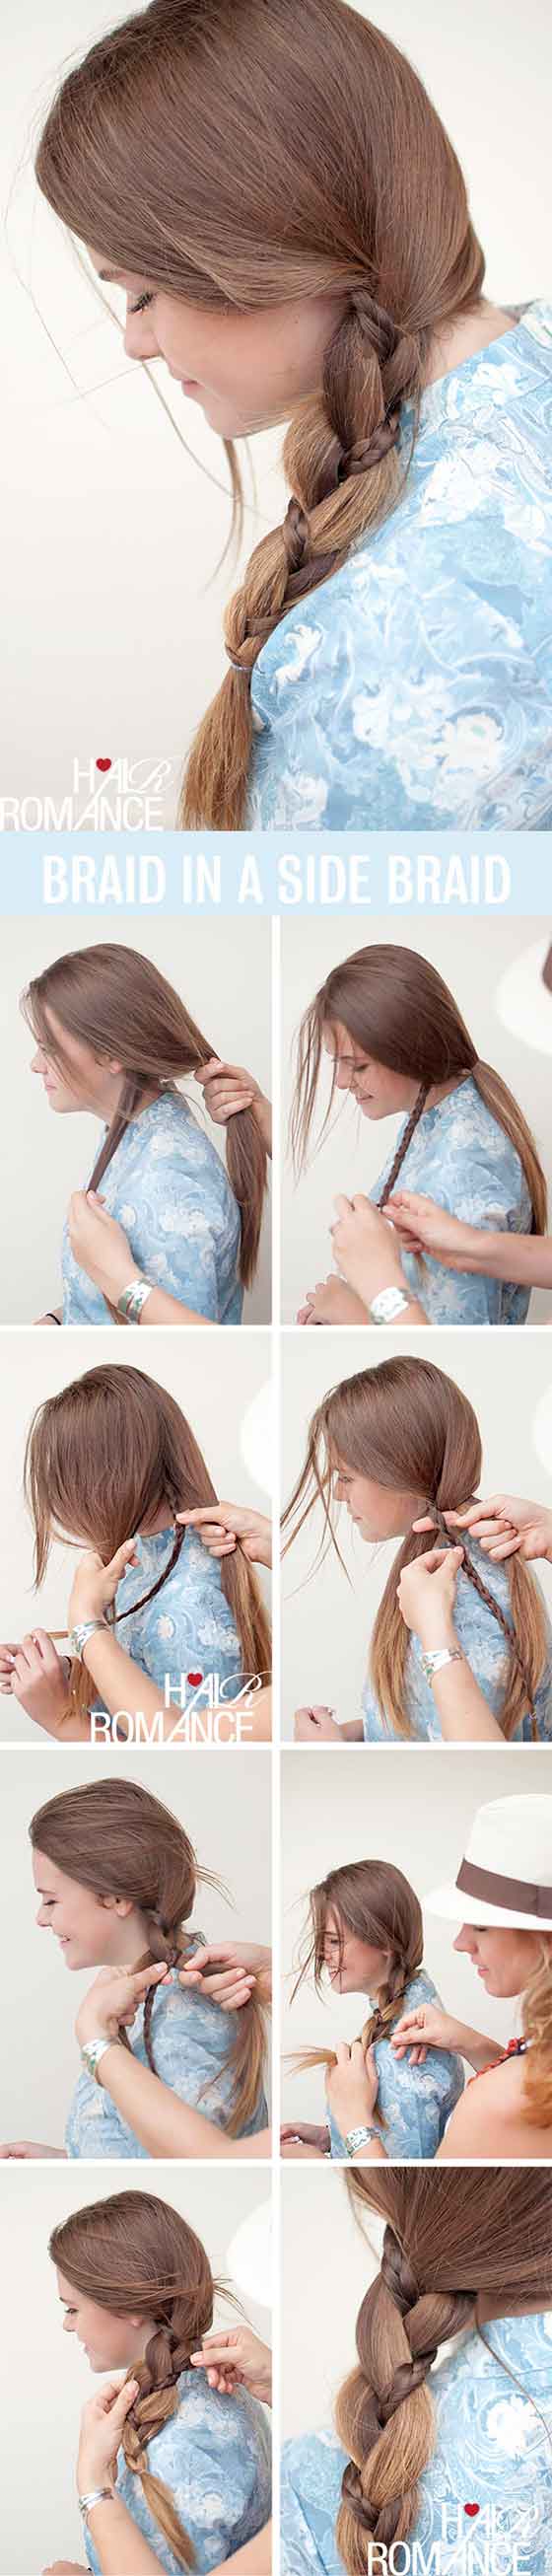 Braid in a side for long hair